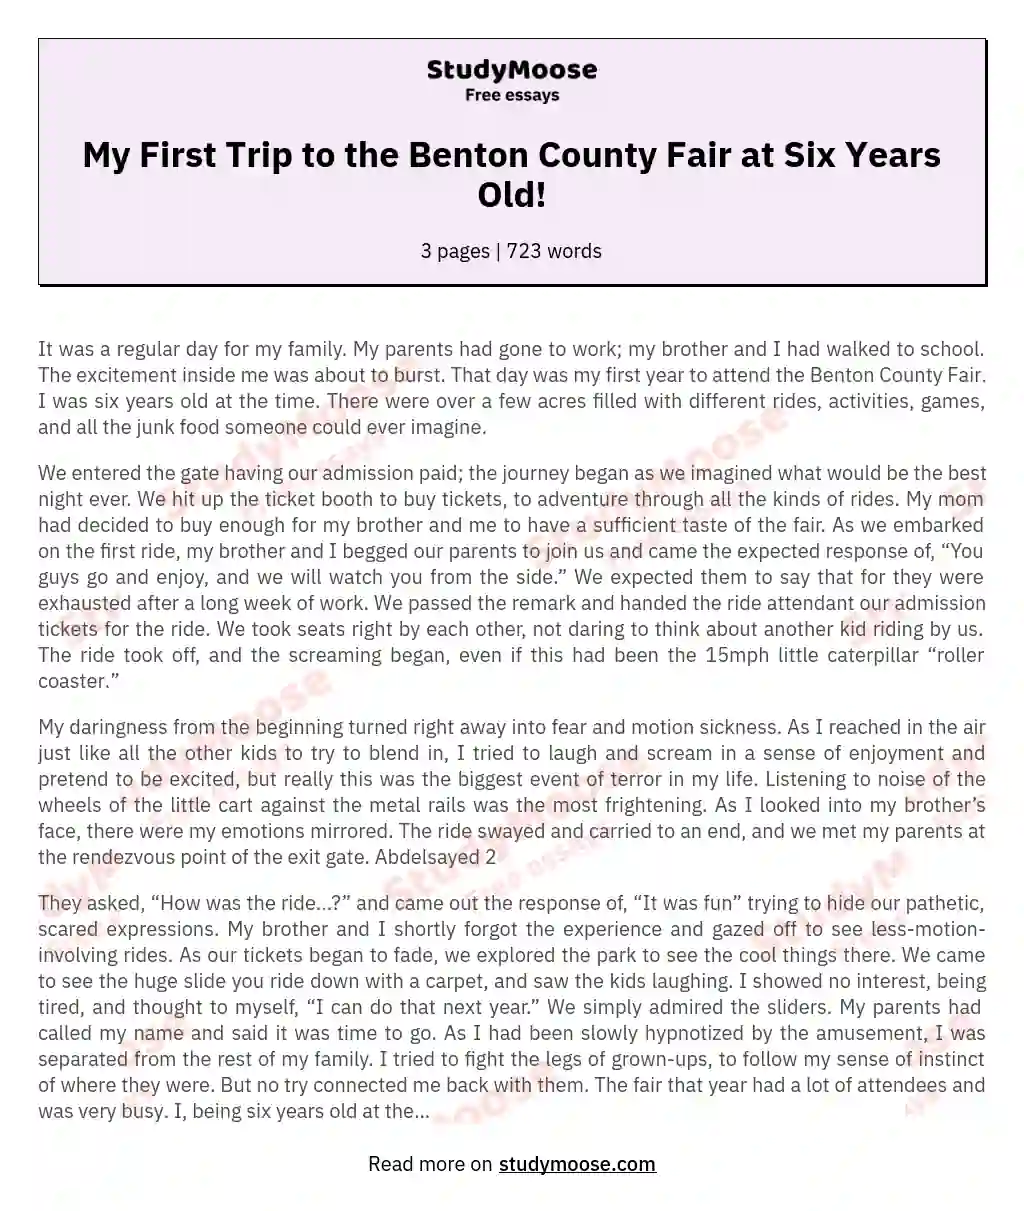 My First Trip to the Benton County Fair at Six Years Old! essay